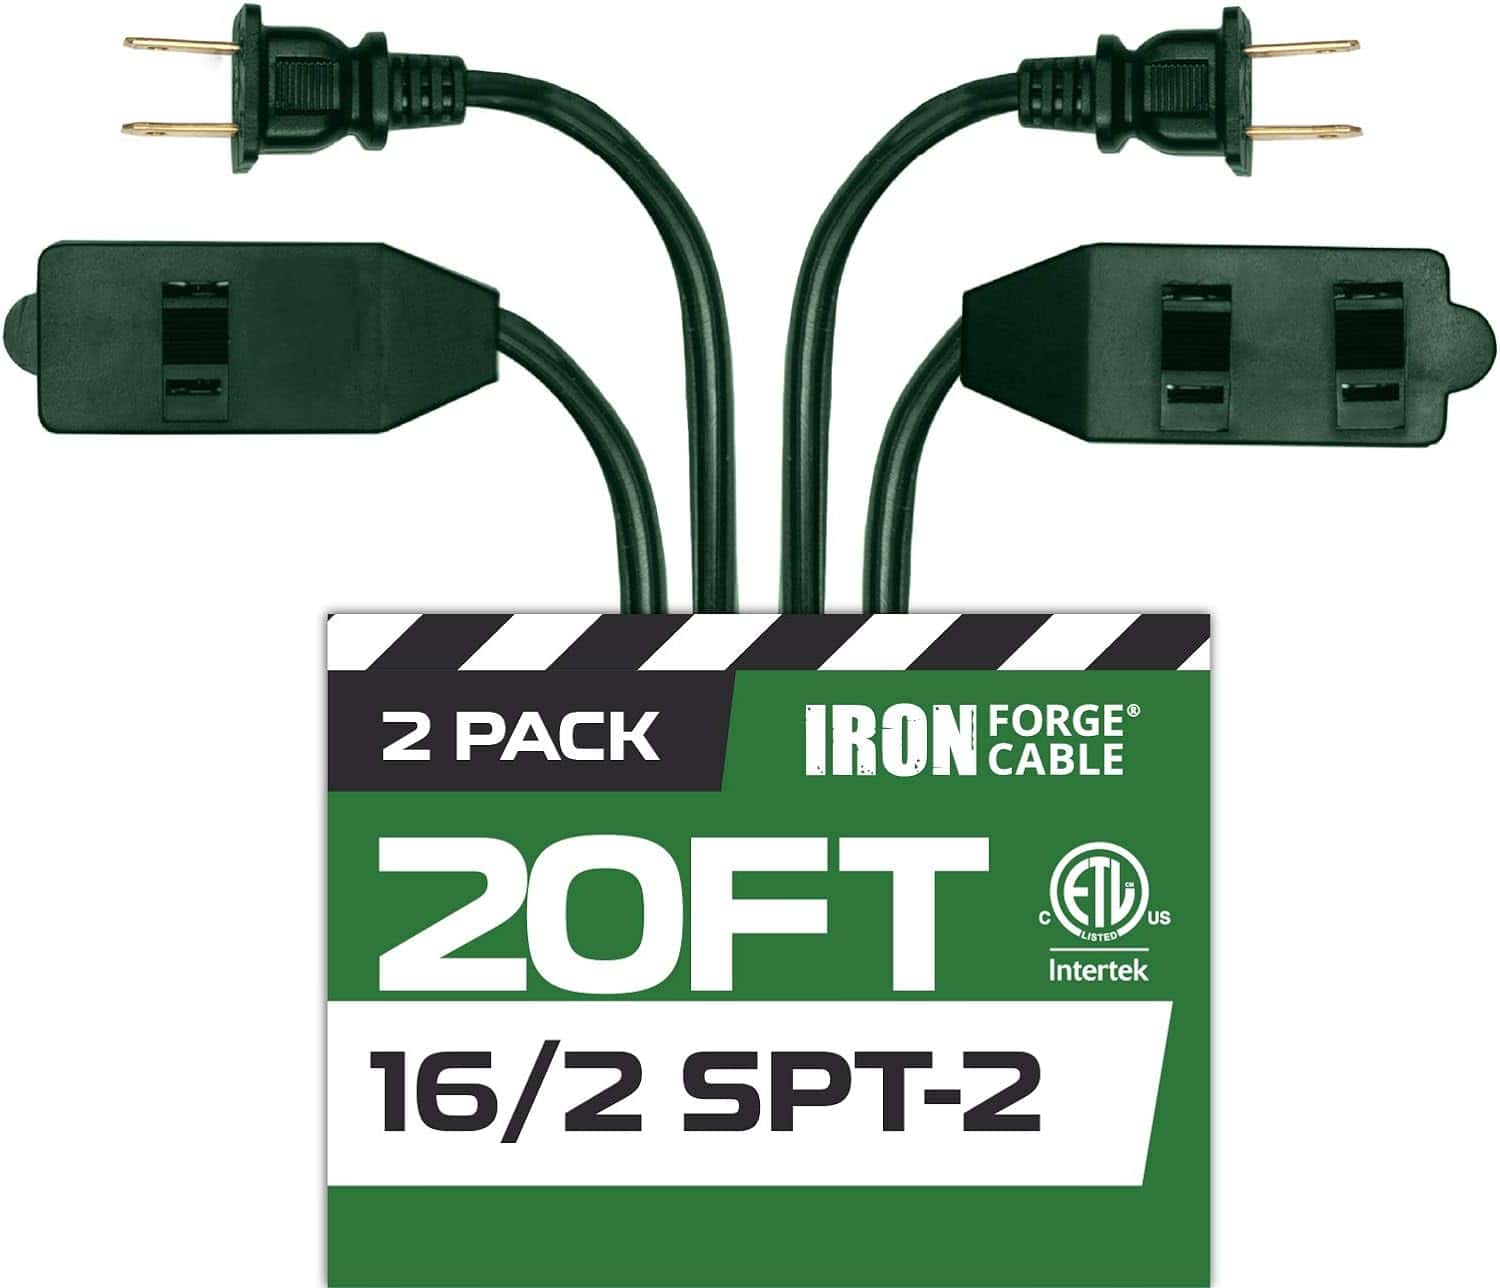 Iron Forge Cable 20 Ft Green Extension Cord with 3 Outlets 16 2 Indoor Extension Cord with Multiple Outlets 13 AMP 2 Prong Electrical Cable for Home Office Household Appliances 1